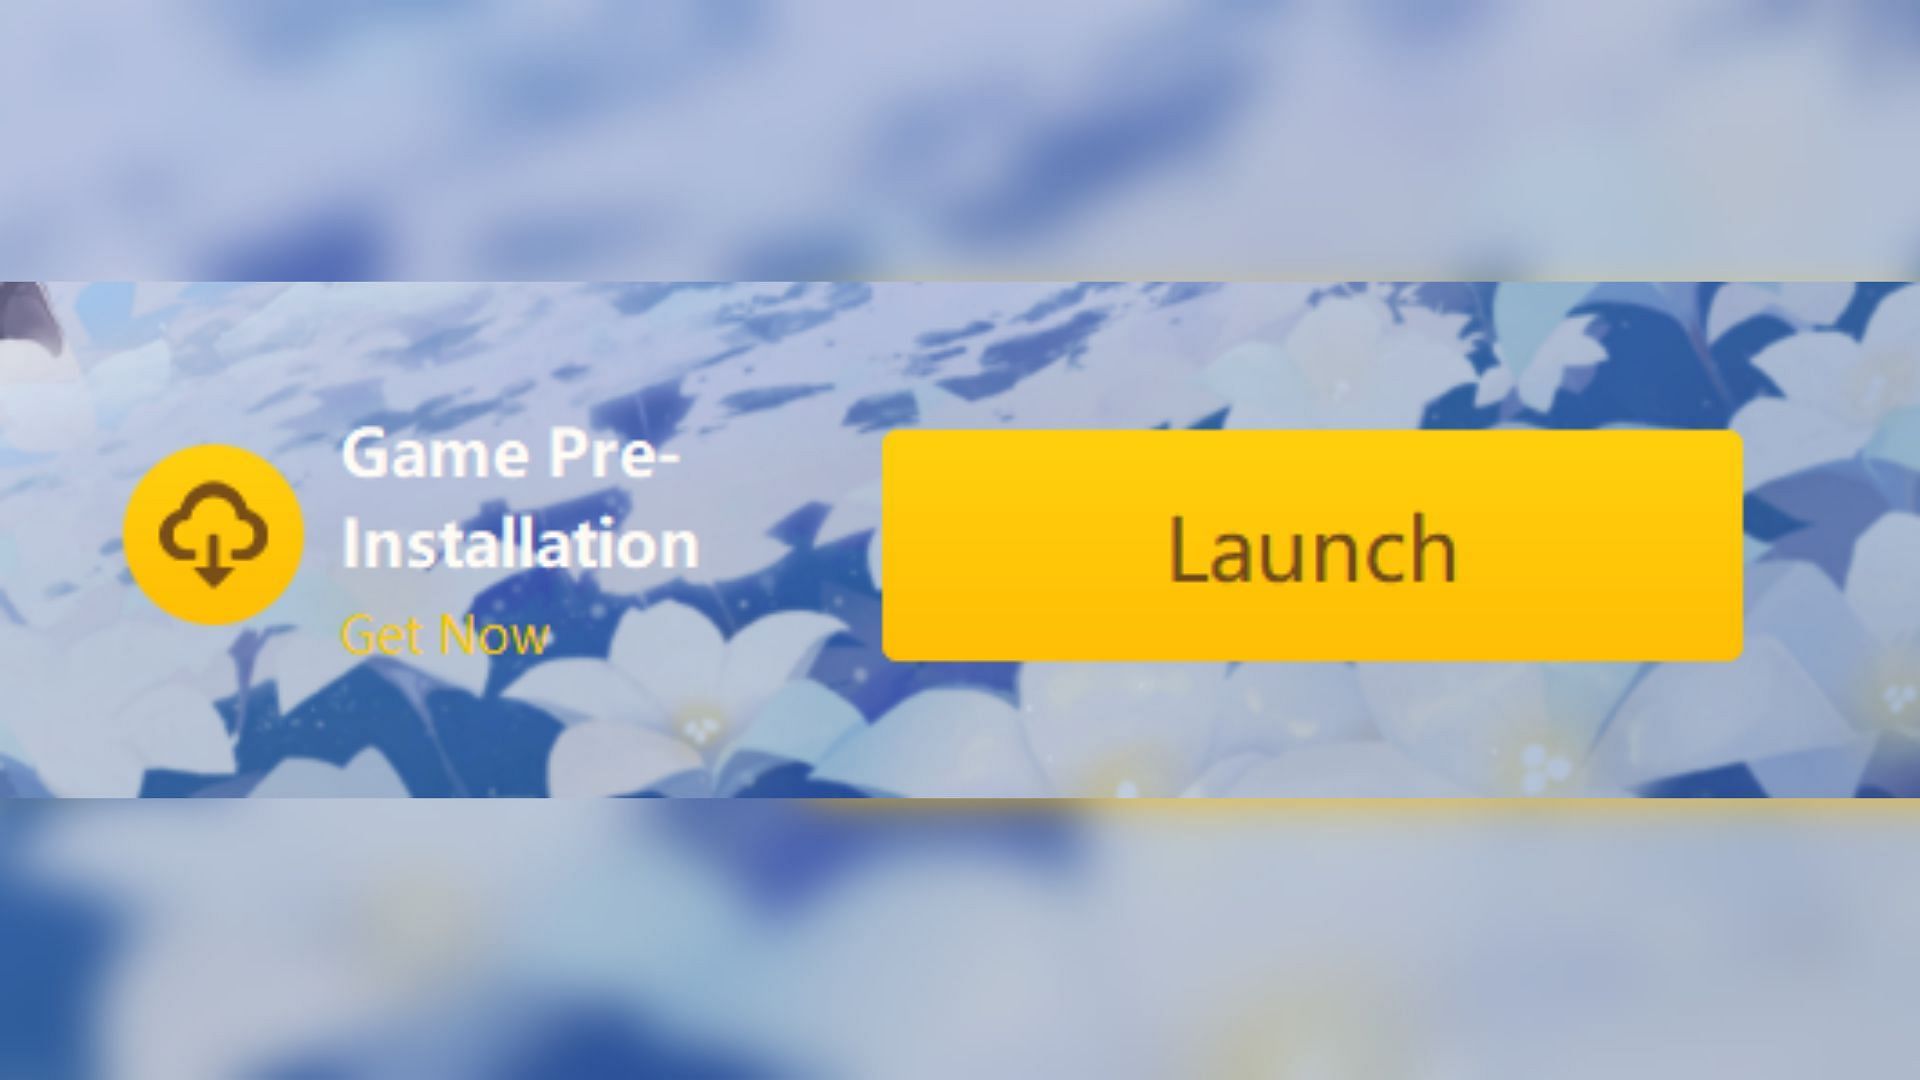 Pre-installation for PC users available on the launcher (Image via HoYoverse)